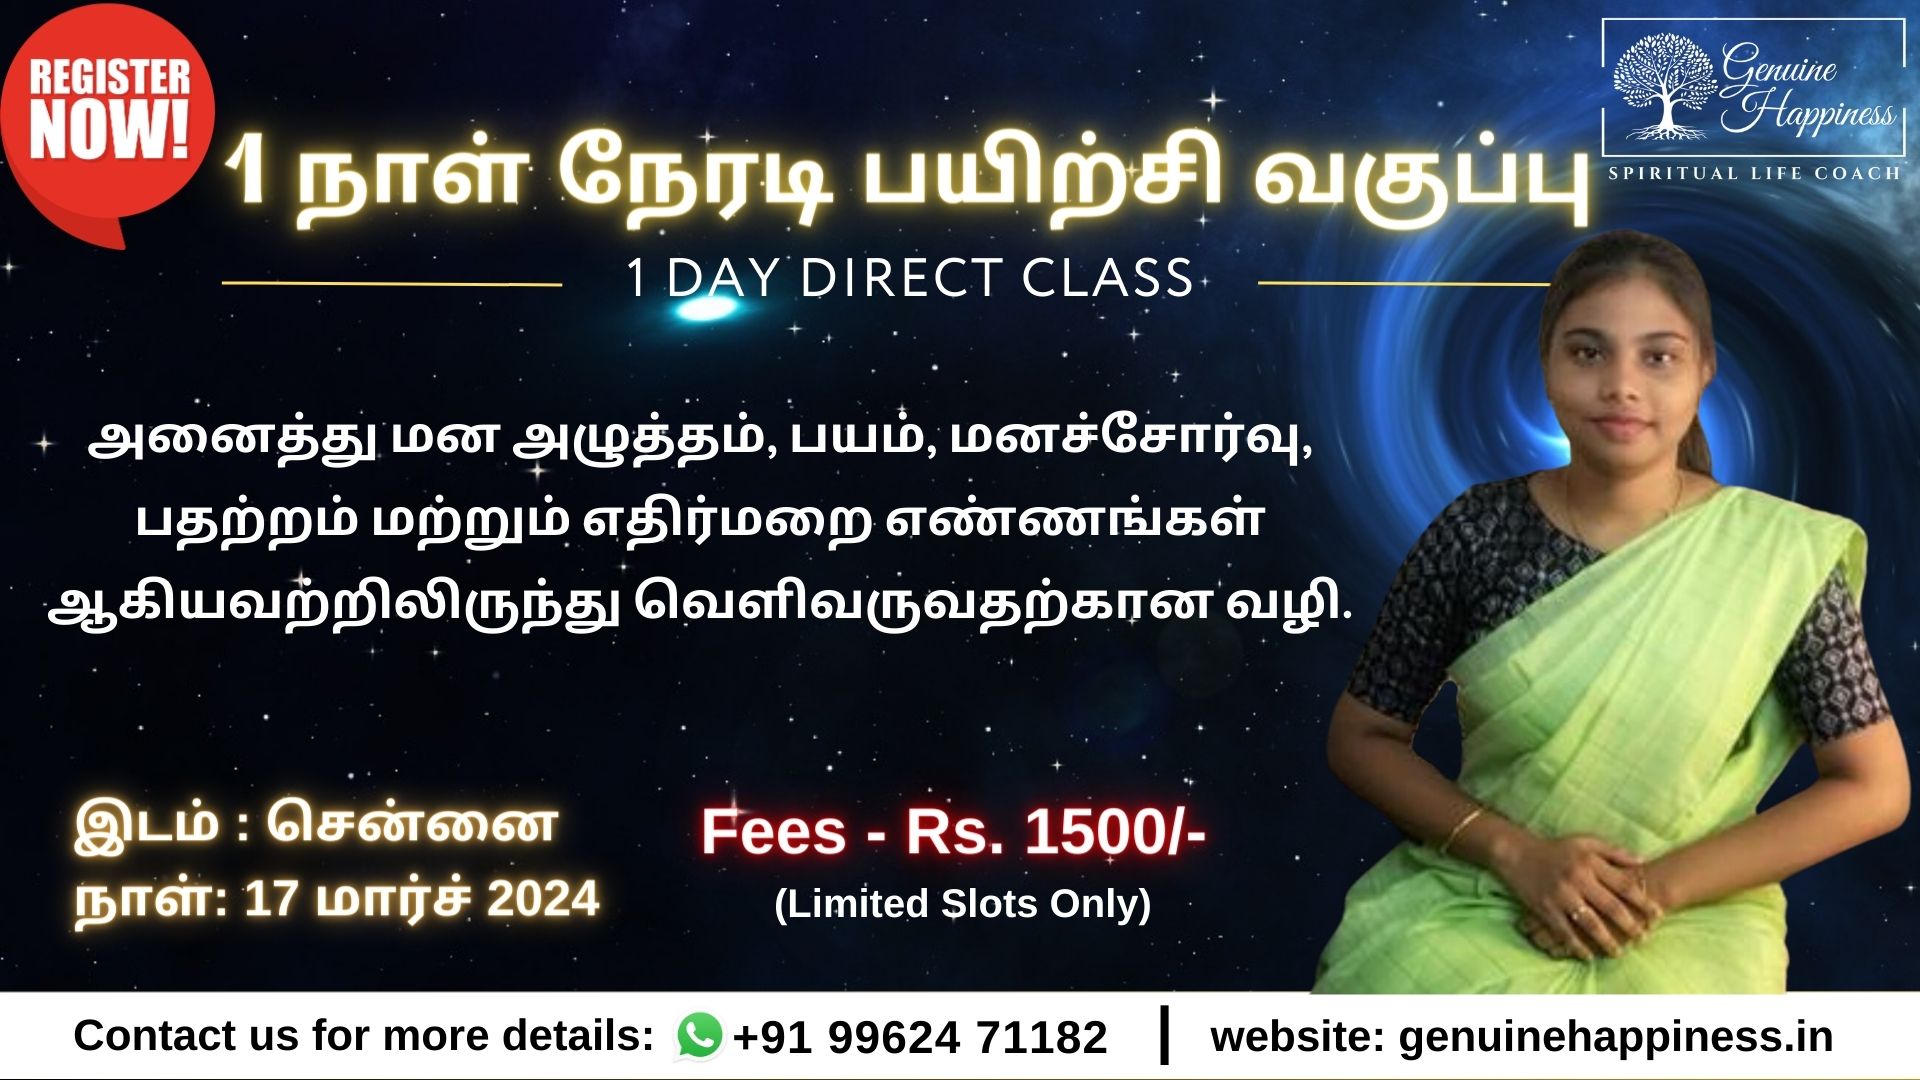 Genuine Happiness Spiritual Life coach direct class in tamil